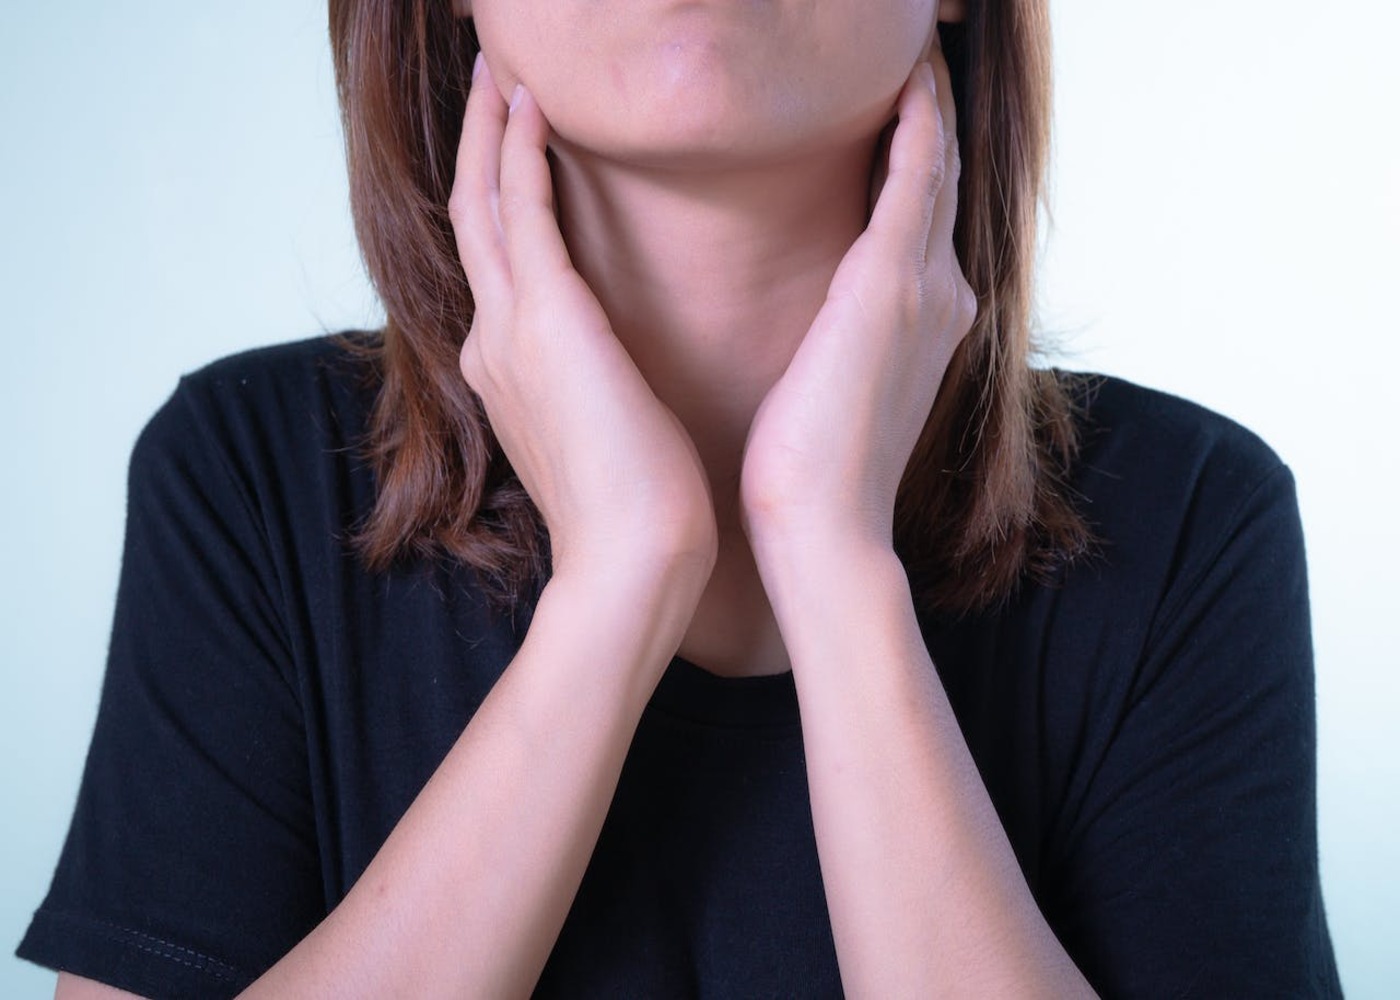 Why Tonsillectomy? Deciding on Tonsil Surgery with Your Tonsillitis Specialist